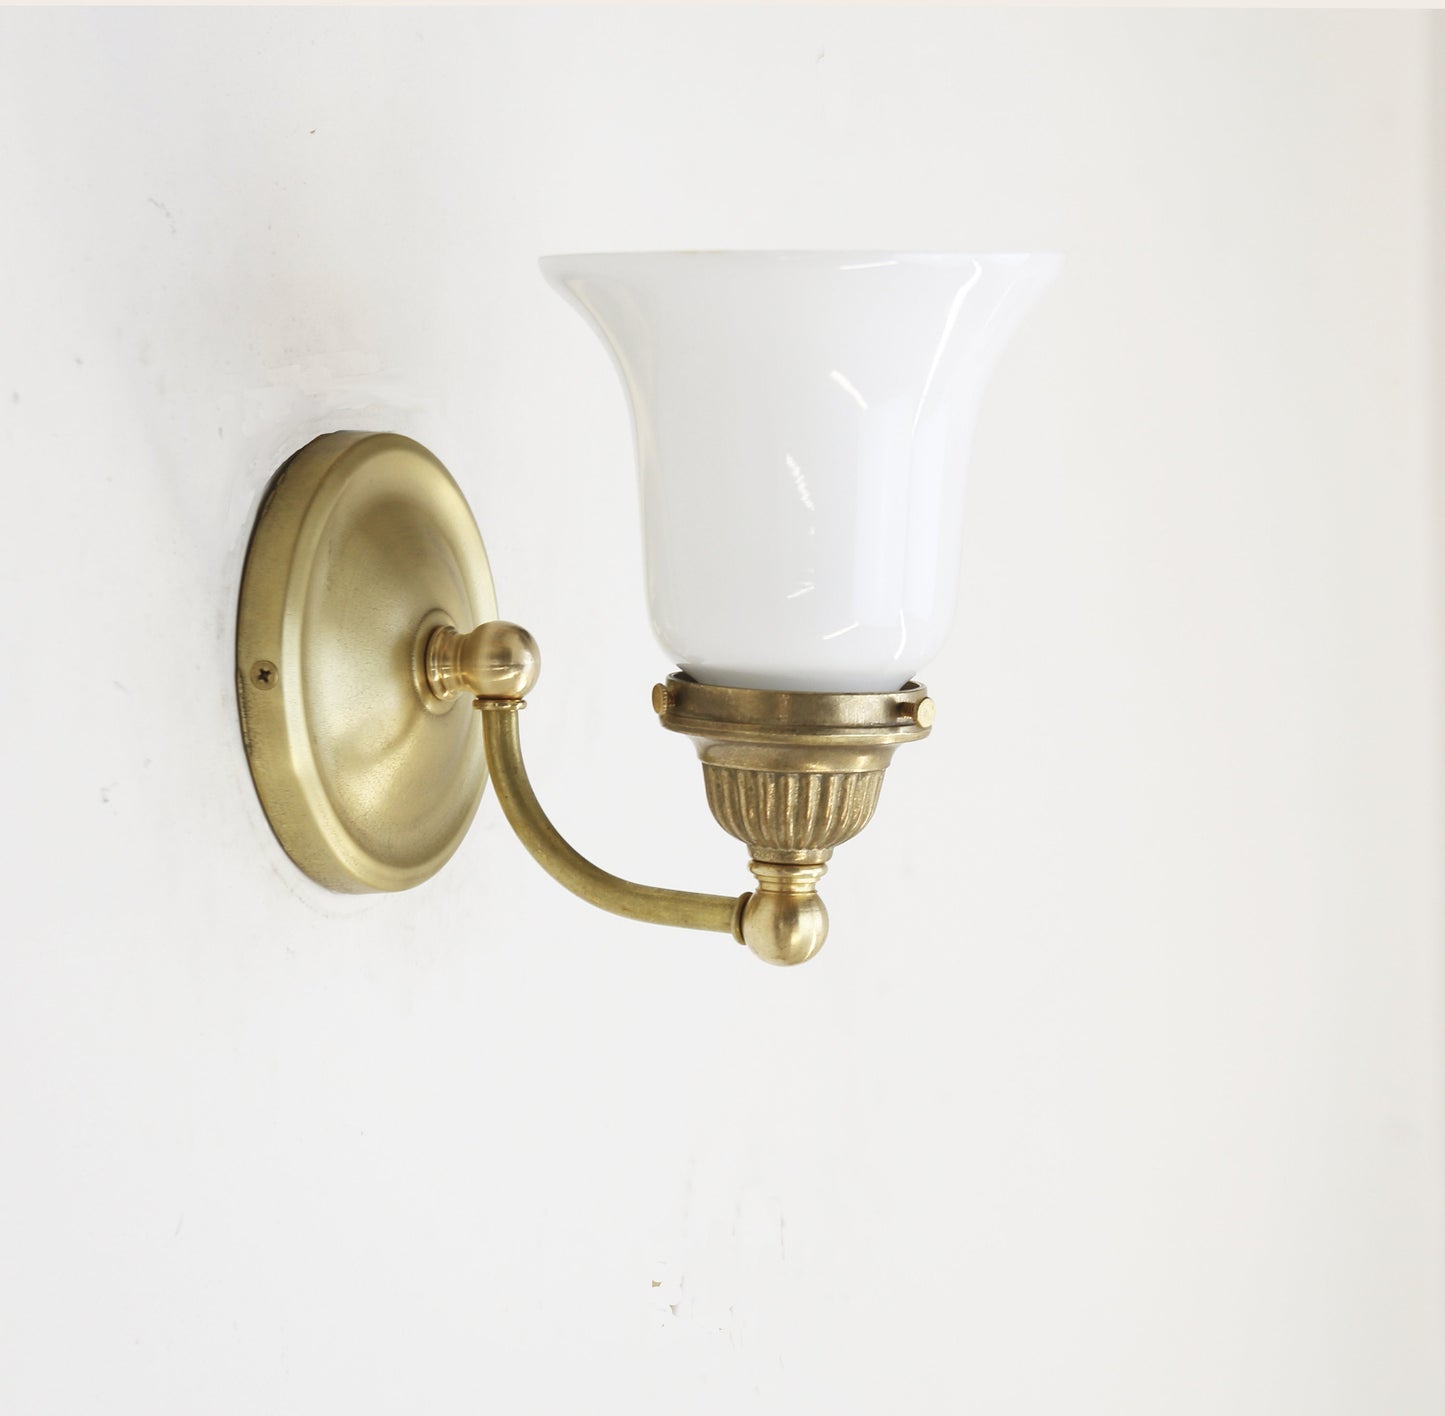 Casting Canopy Wall sconce Light, Brass Wall Sconce Light, Classic Wall Sconce Light